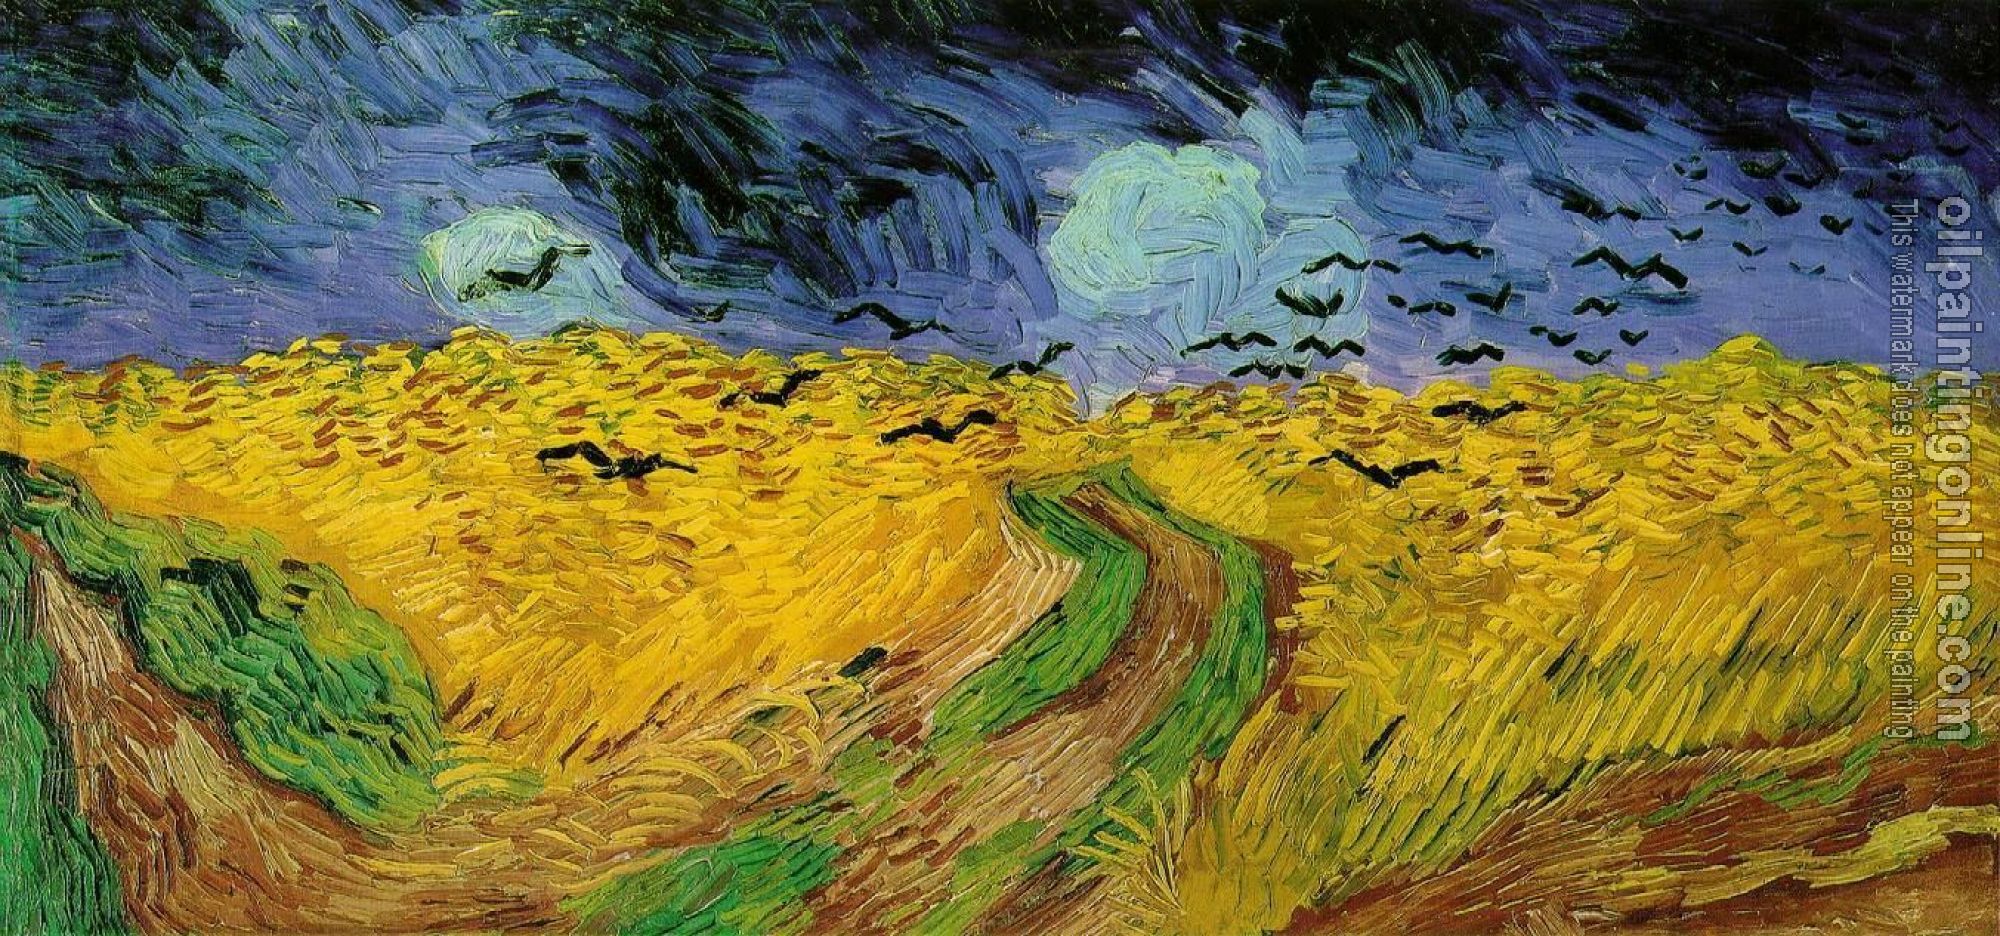 Gogh, Vincent van - Wheat Field with Crows